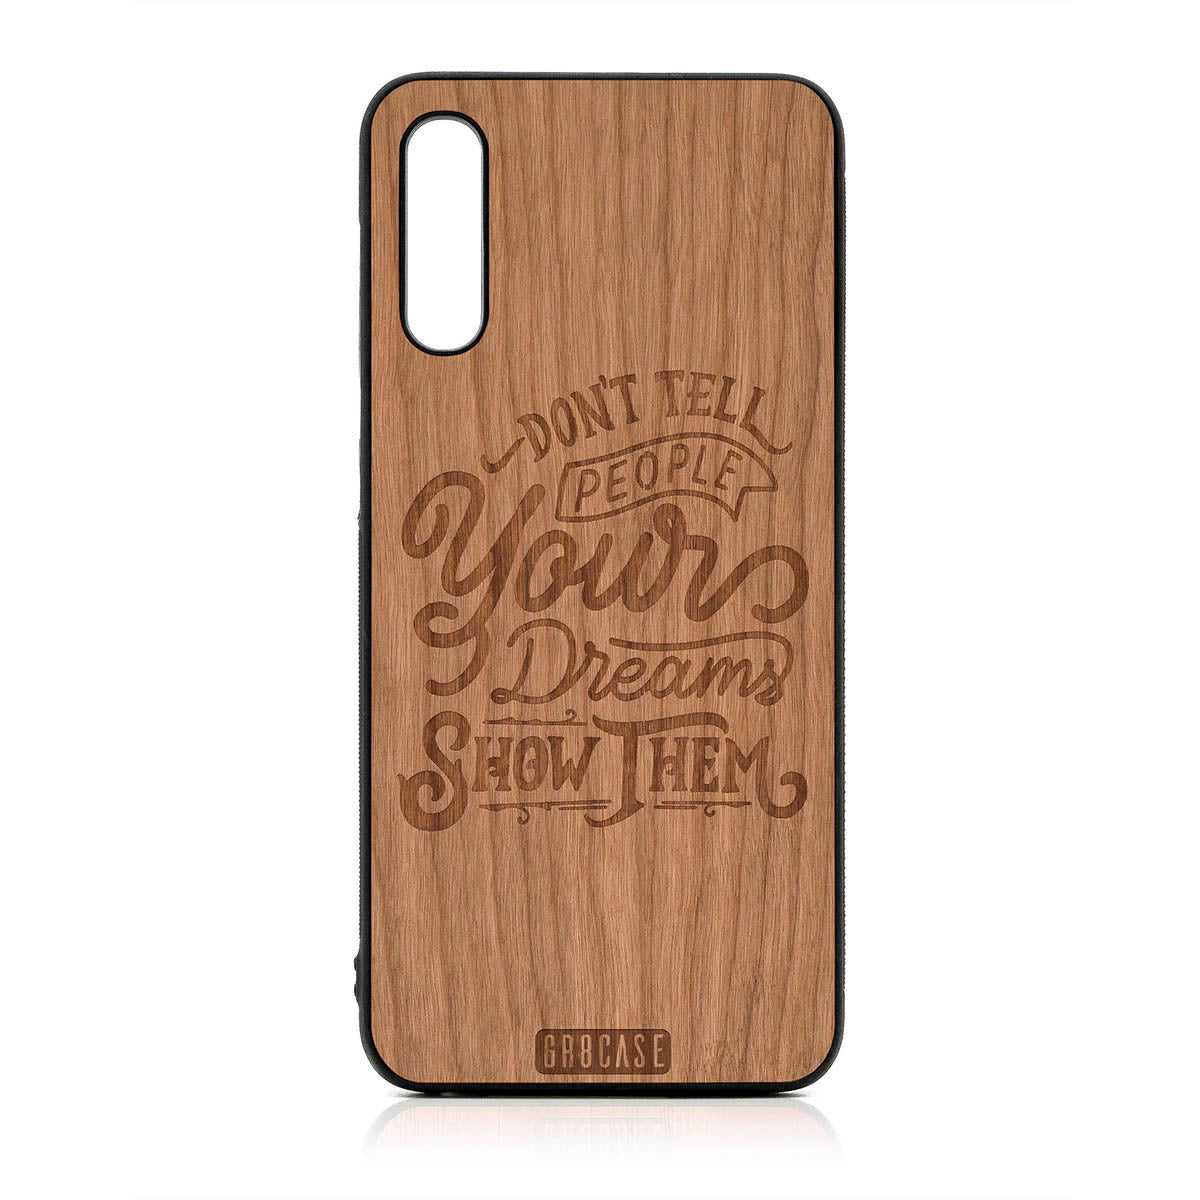 Don't Tell People Your Dreams Show Them Design Wood Case For Samsung Galaxy A50 by GR8CASE